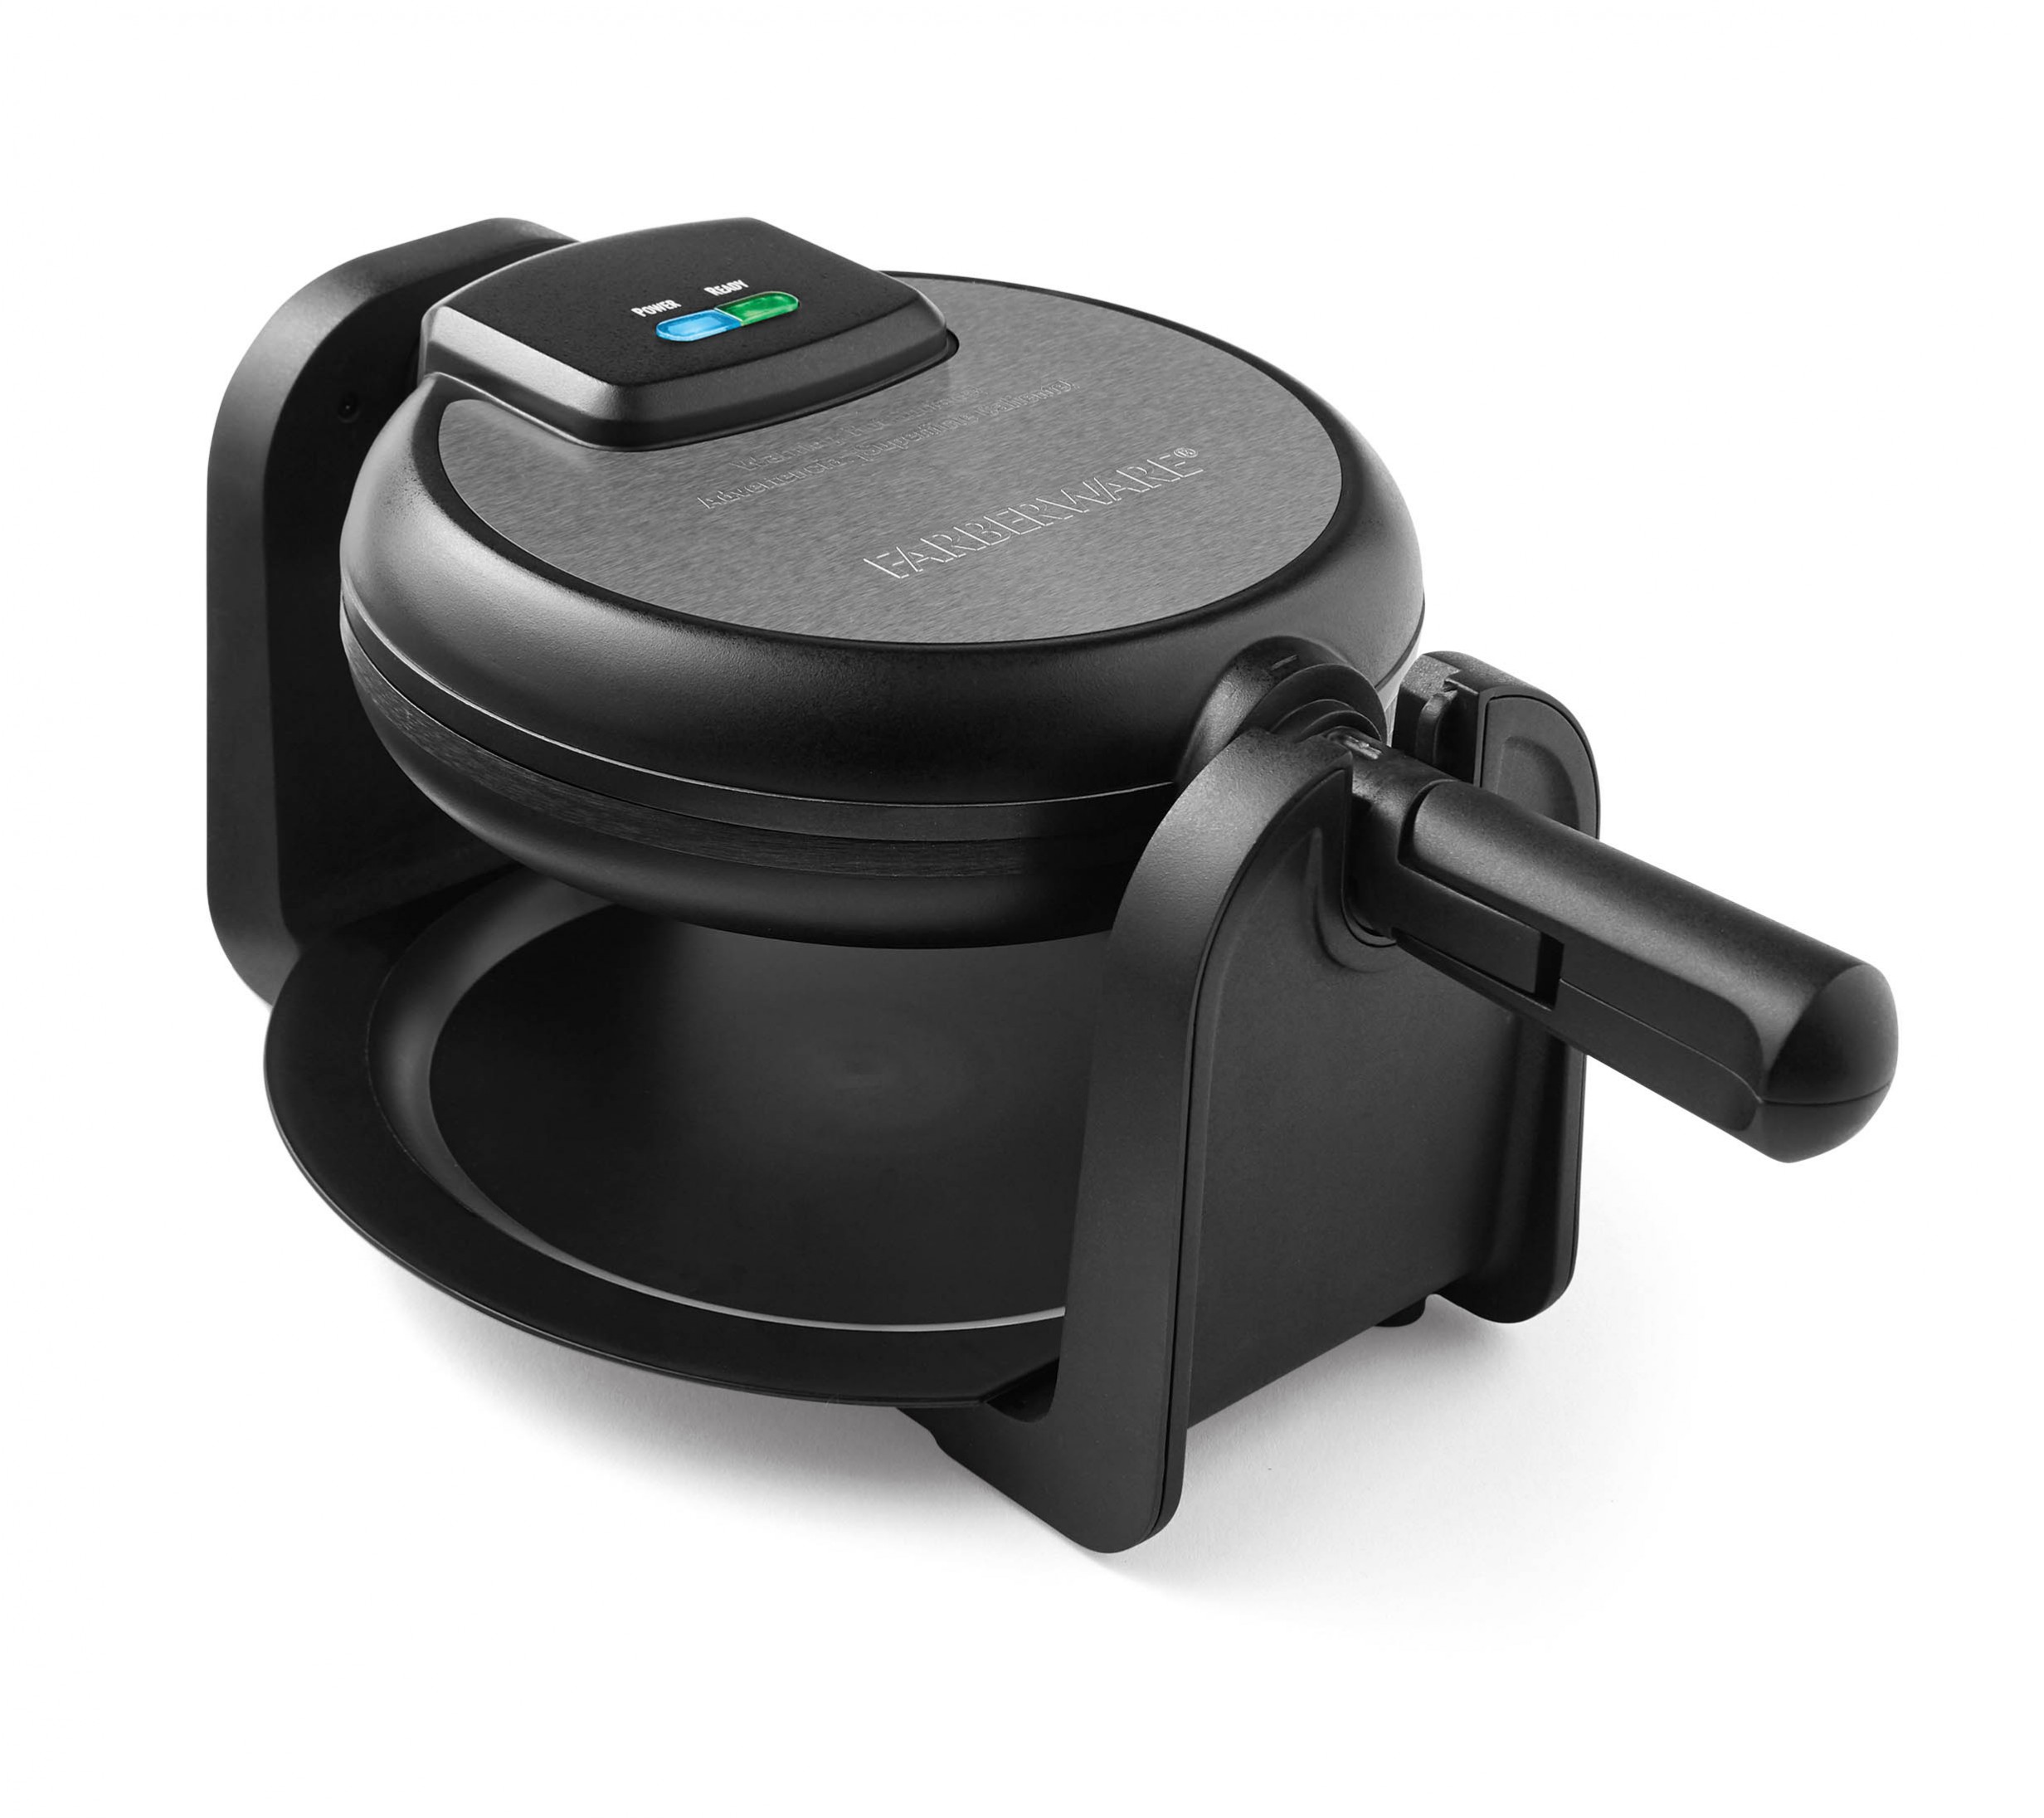 Farberware Single-Flip Waffle Maker, Black with Stainless Steel Decoration - image 1 of 6